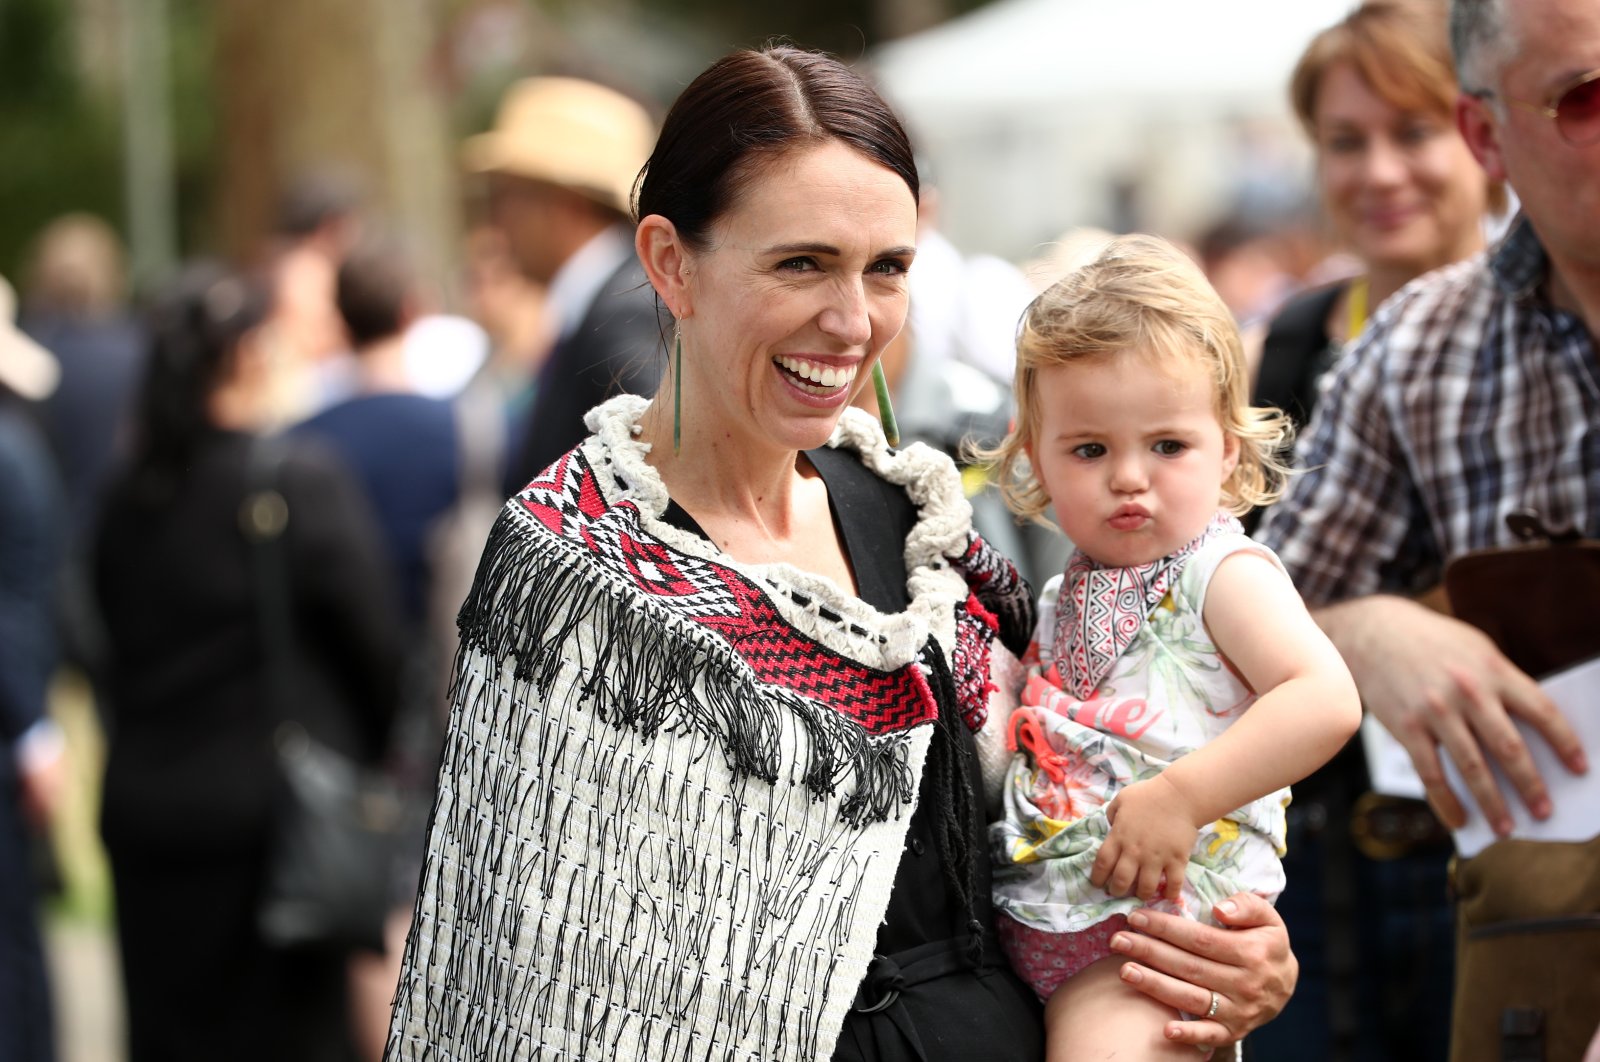 New Zealand Prime Minister Jacinda Ardern (L) and her daughter Neve Gayford at the upper Treaty grounds at Waitangi in Waitangi, New Zealand, Feb. 4, 2020. (Getty Images)